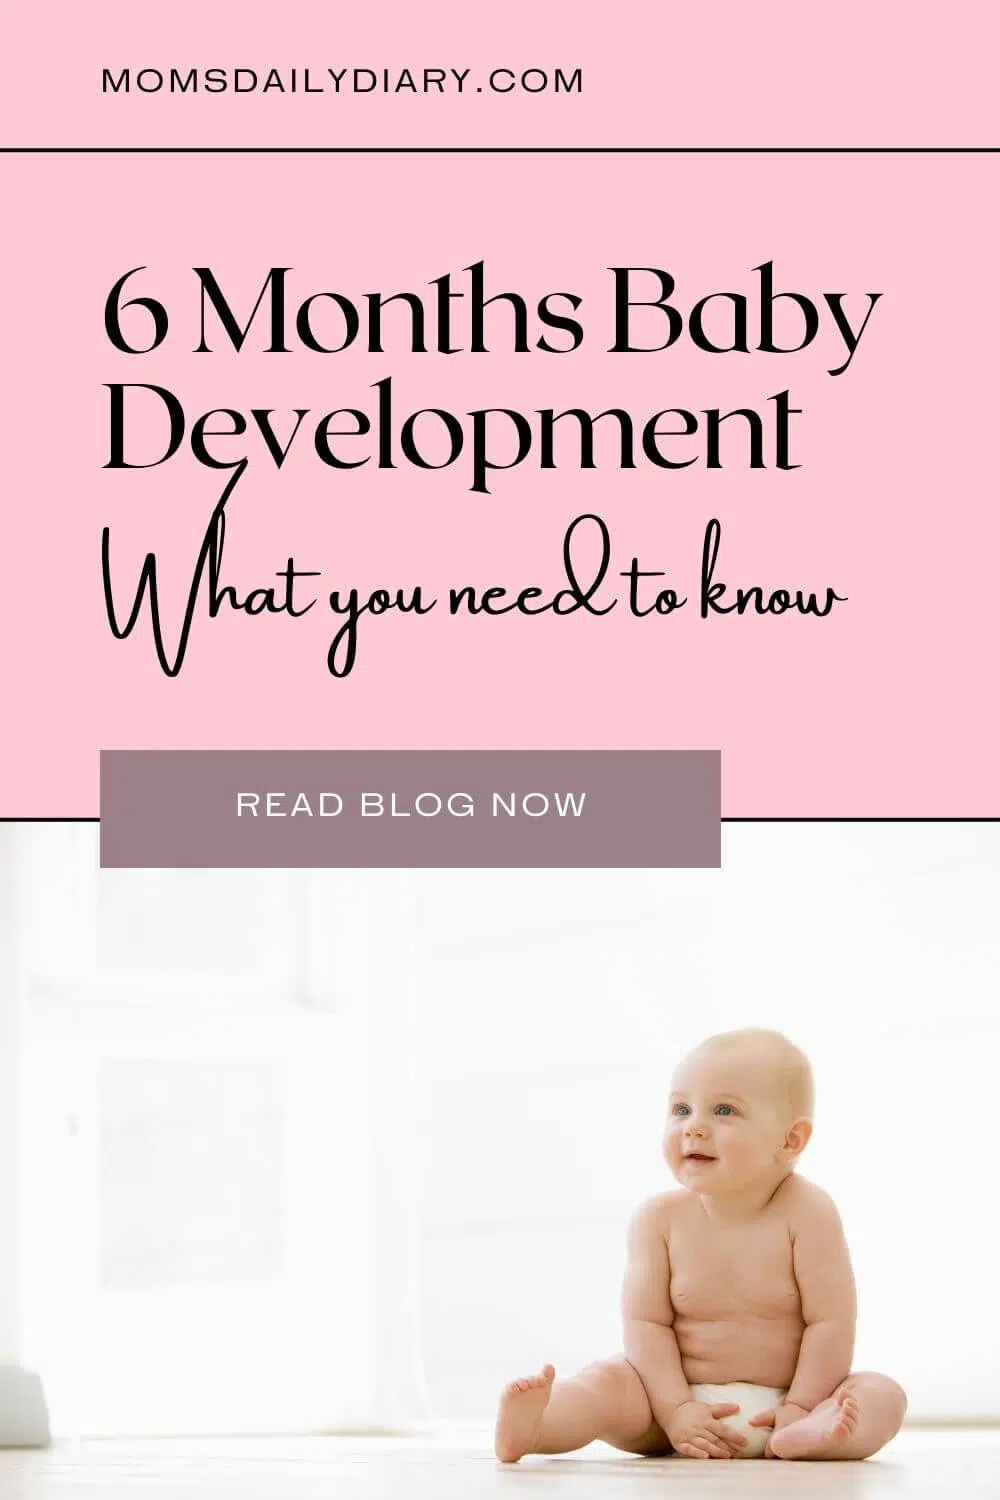 Pinterest pin with text "6 Months Baby Development. What you need to know" and an image of a baby sitting.